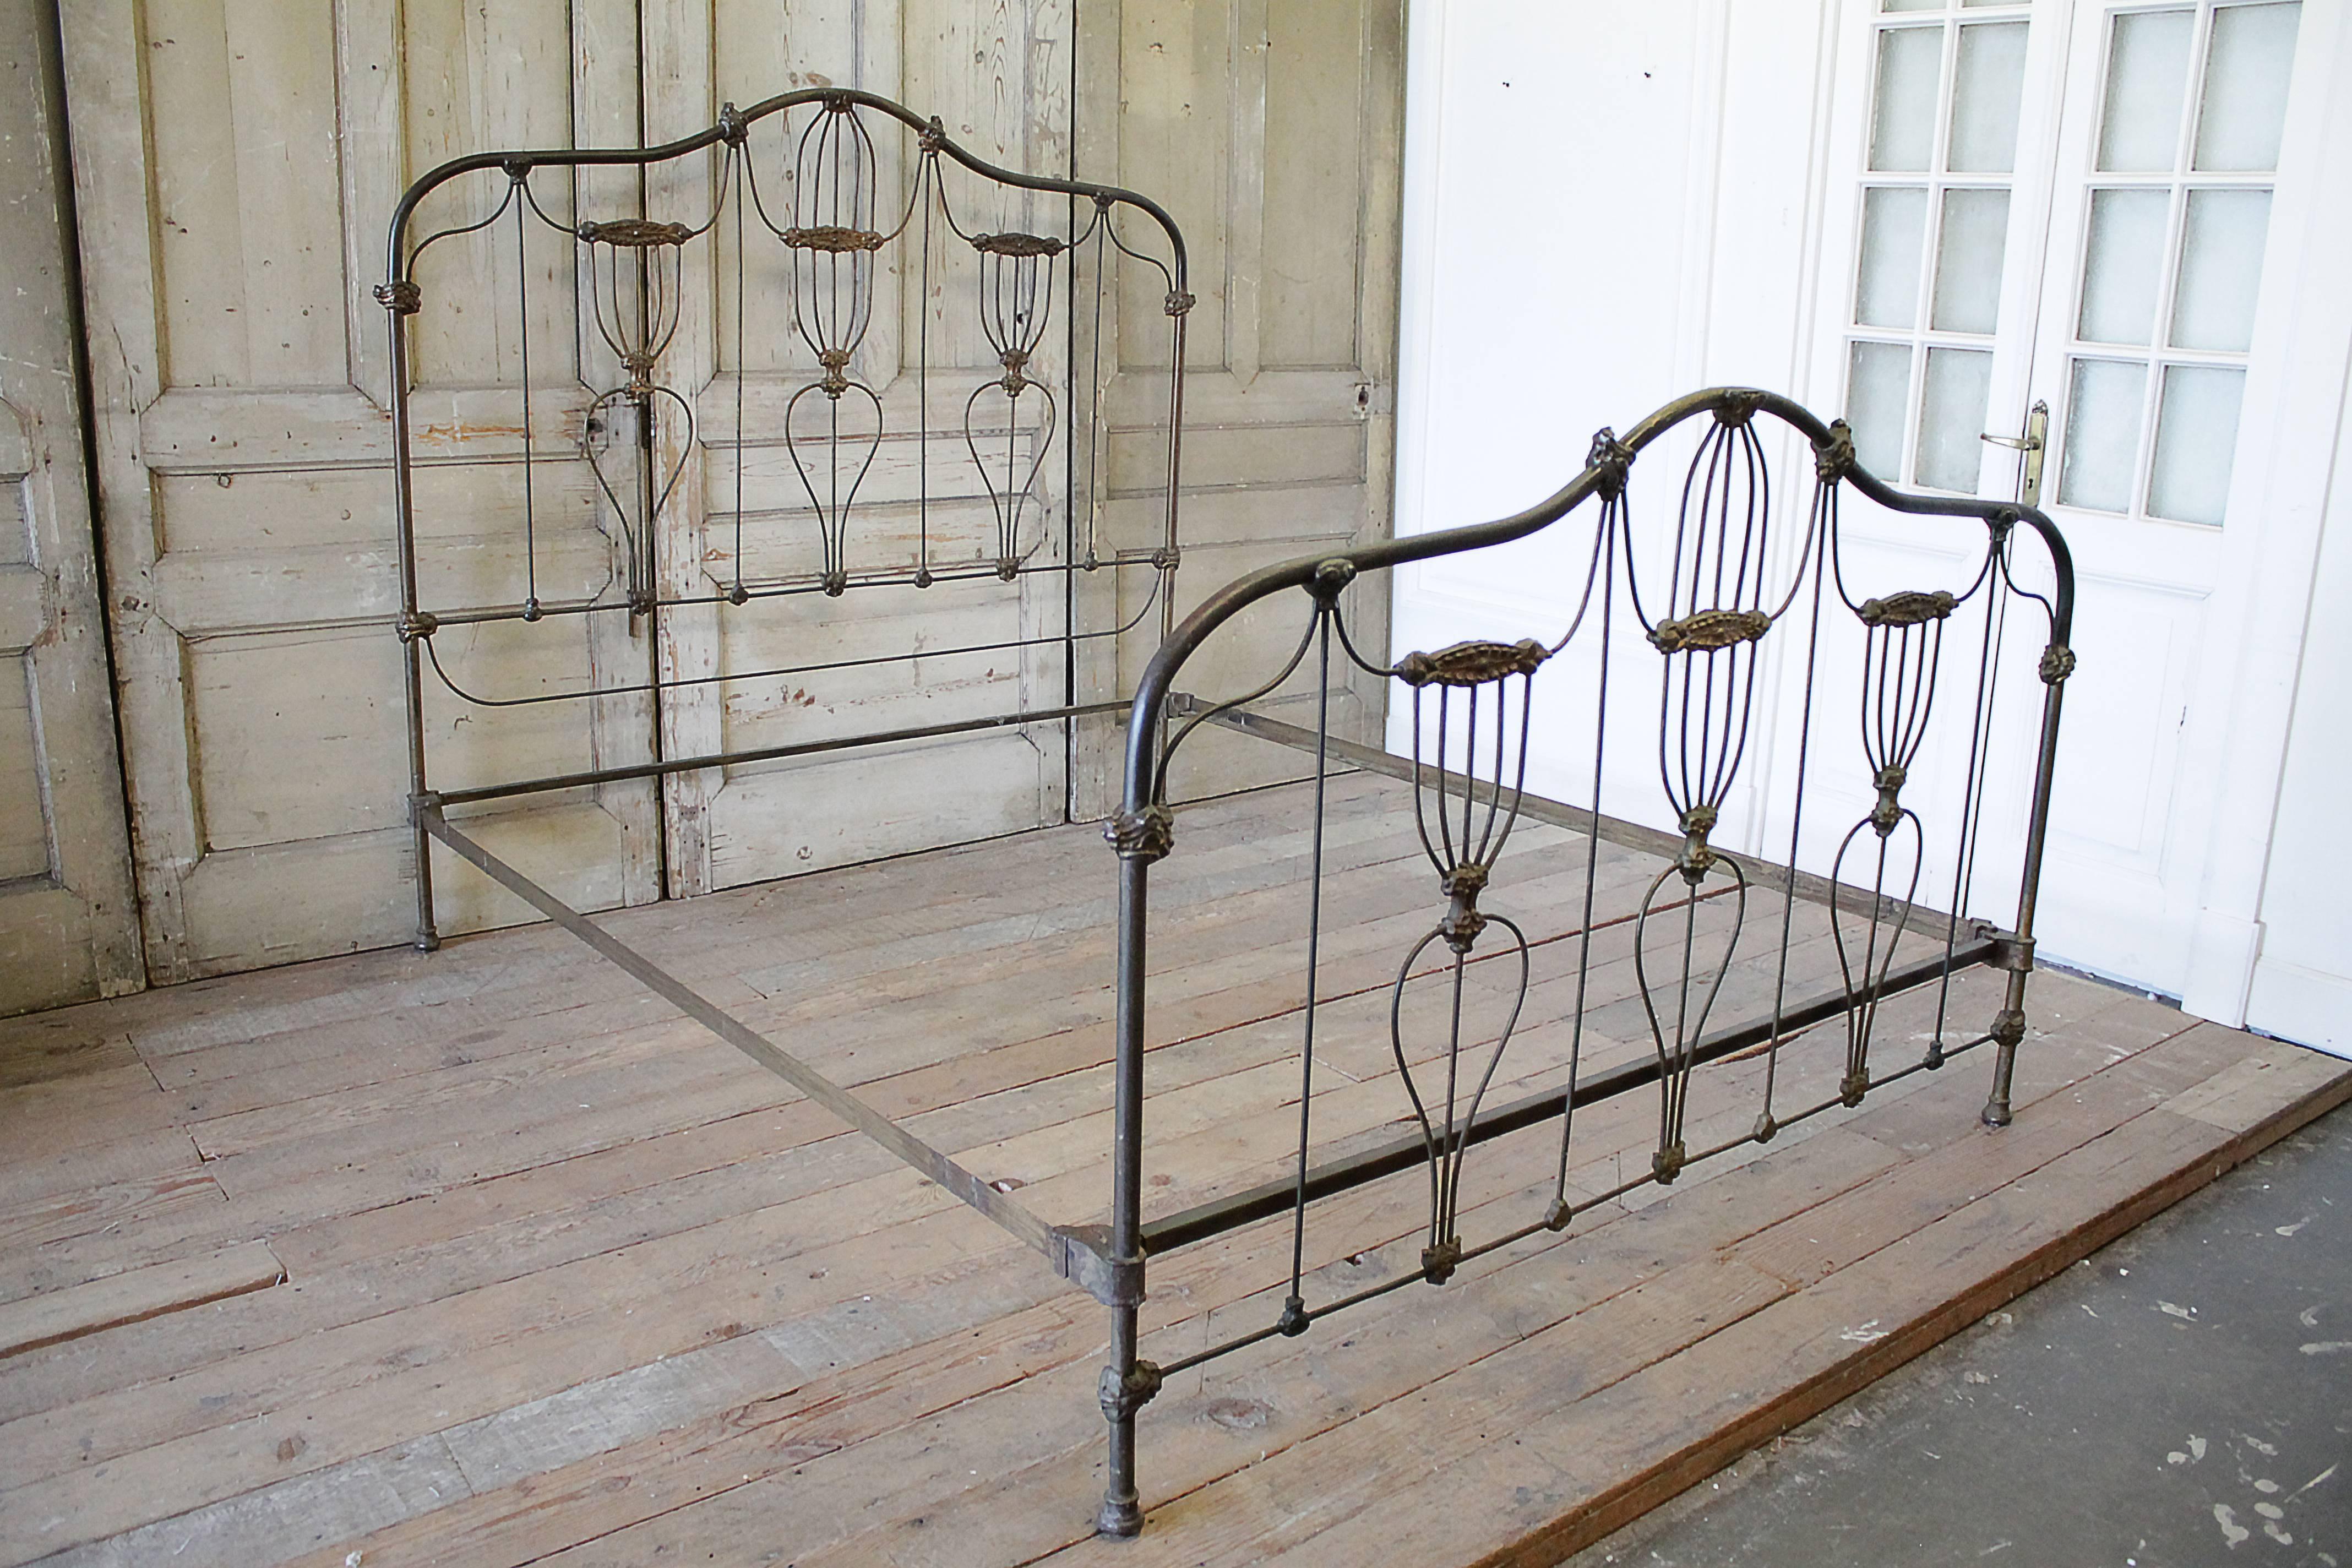 Lovely antique bed has been stretched to a king-size. The rails have been lengthened and this bed accommodates a California King, as well as an eastern King. We will have custom wood slats made to send with this bed to hold the platforms.
The color